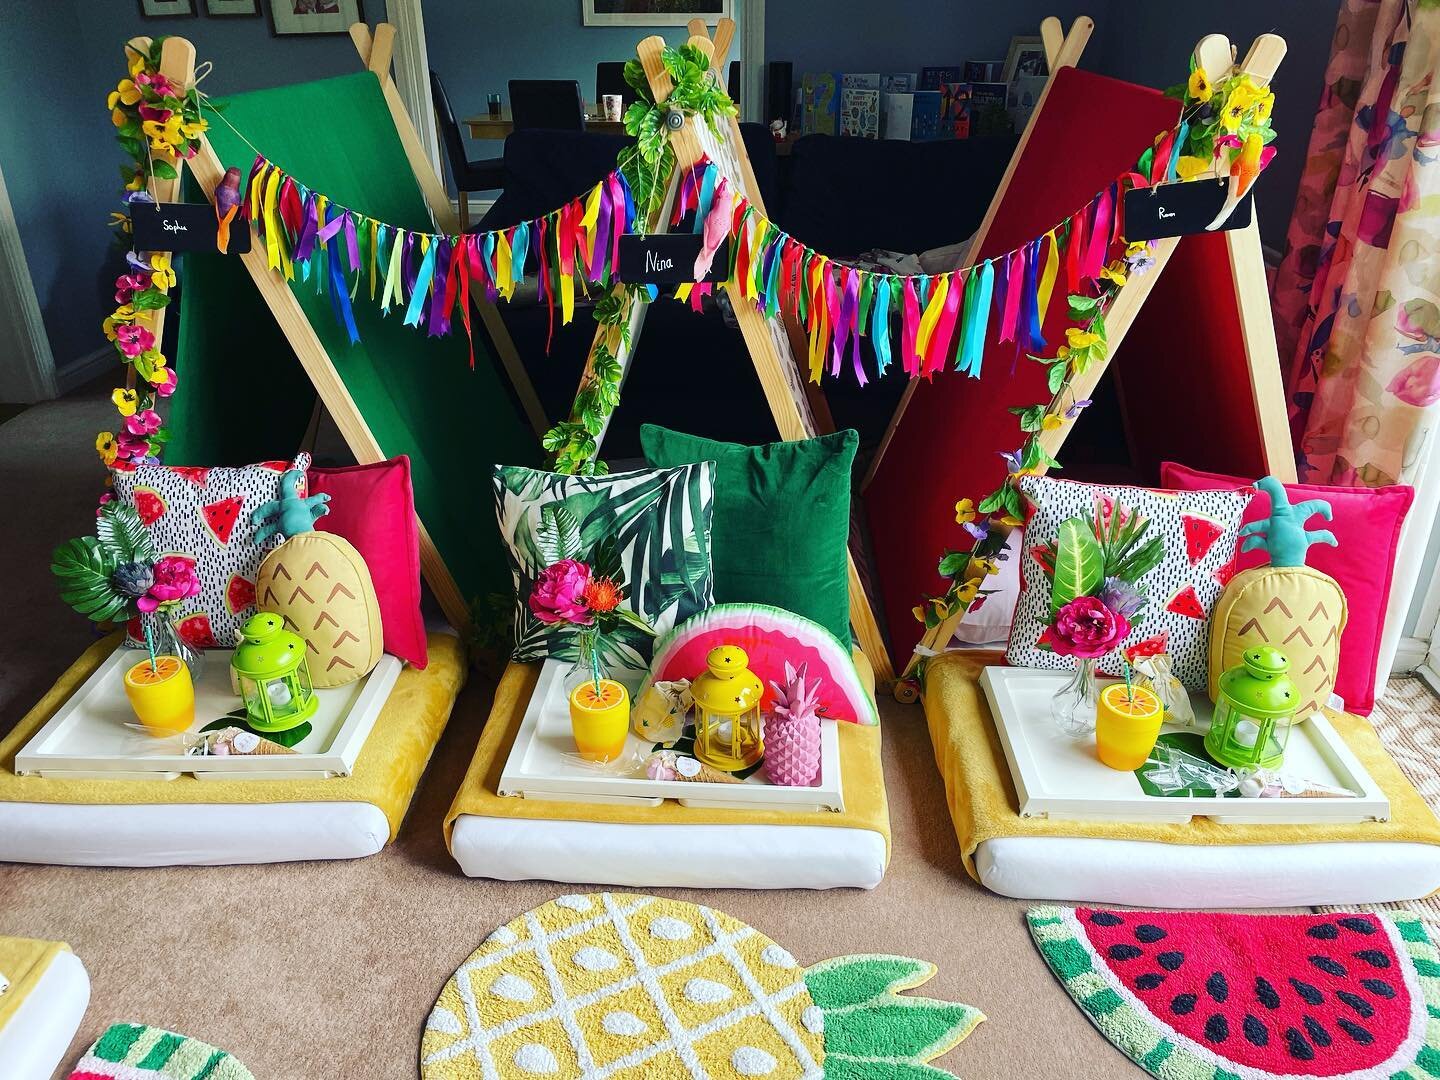 Our tutti frutti theme is becoming one of our most popular themes 🍒🍉🍊🥝🍍Last weekend we set up five teepees for the birthday girl Nina and her friends to celebrate her 9th birthday &hearts;️